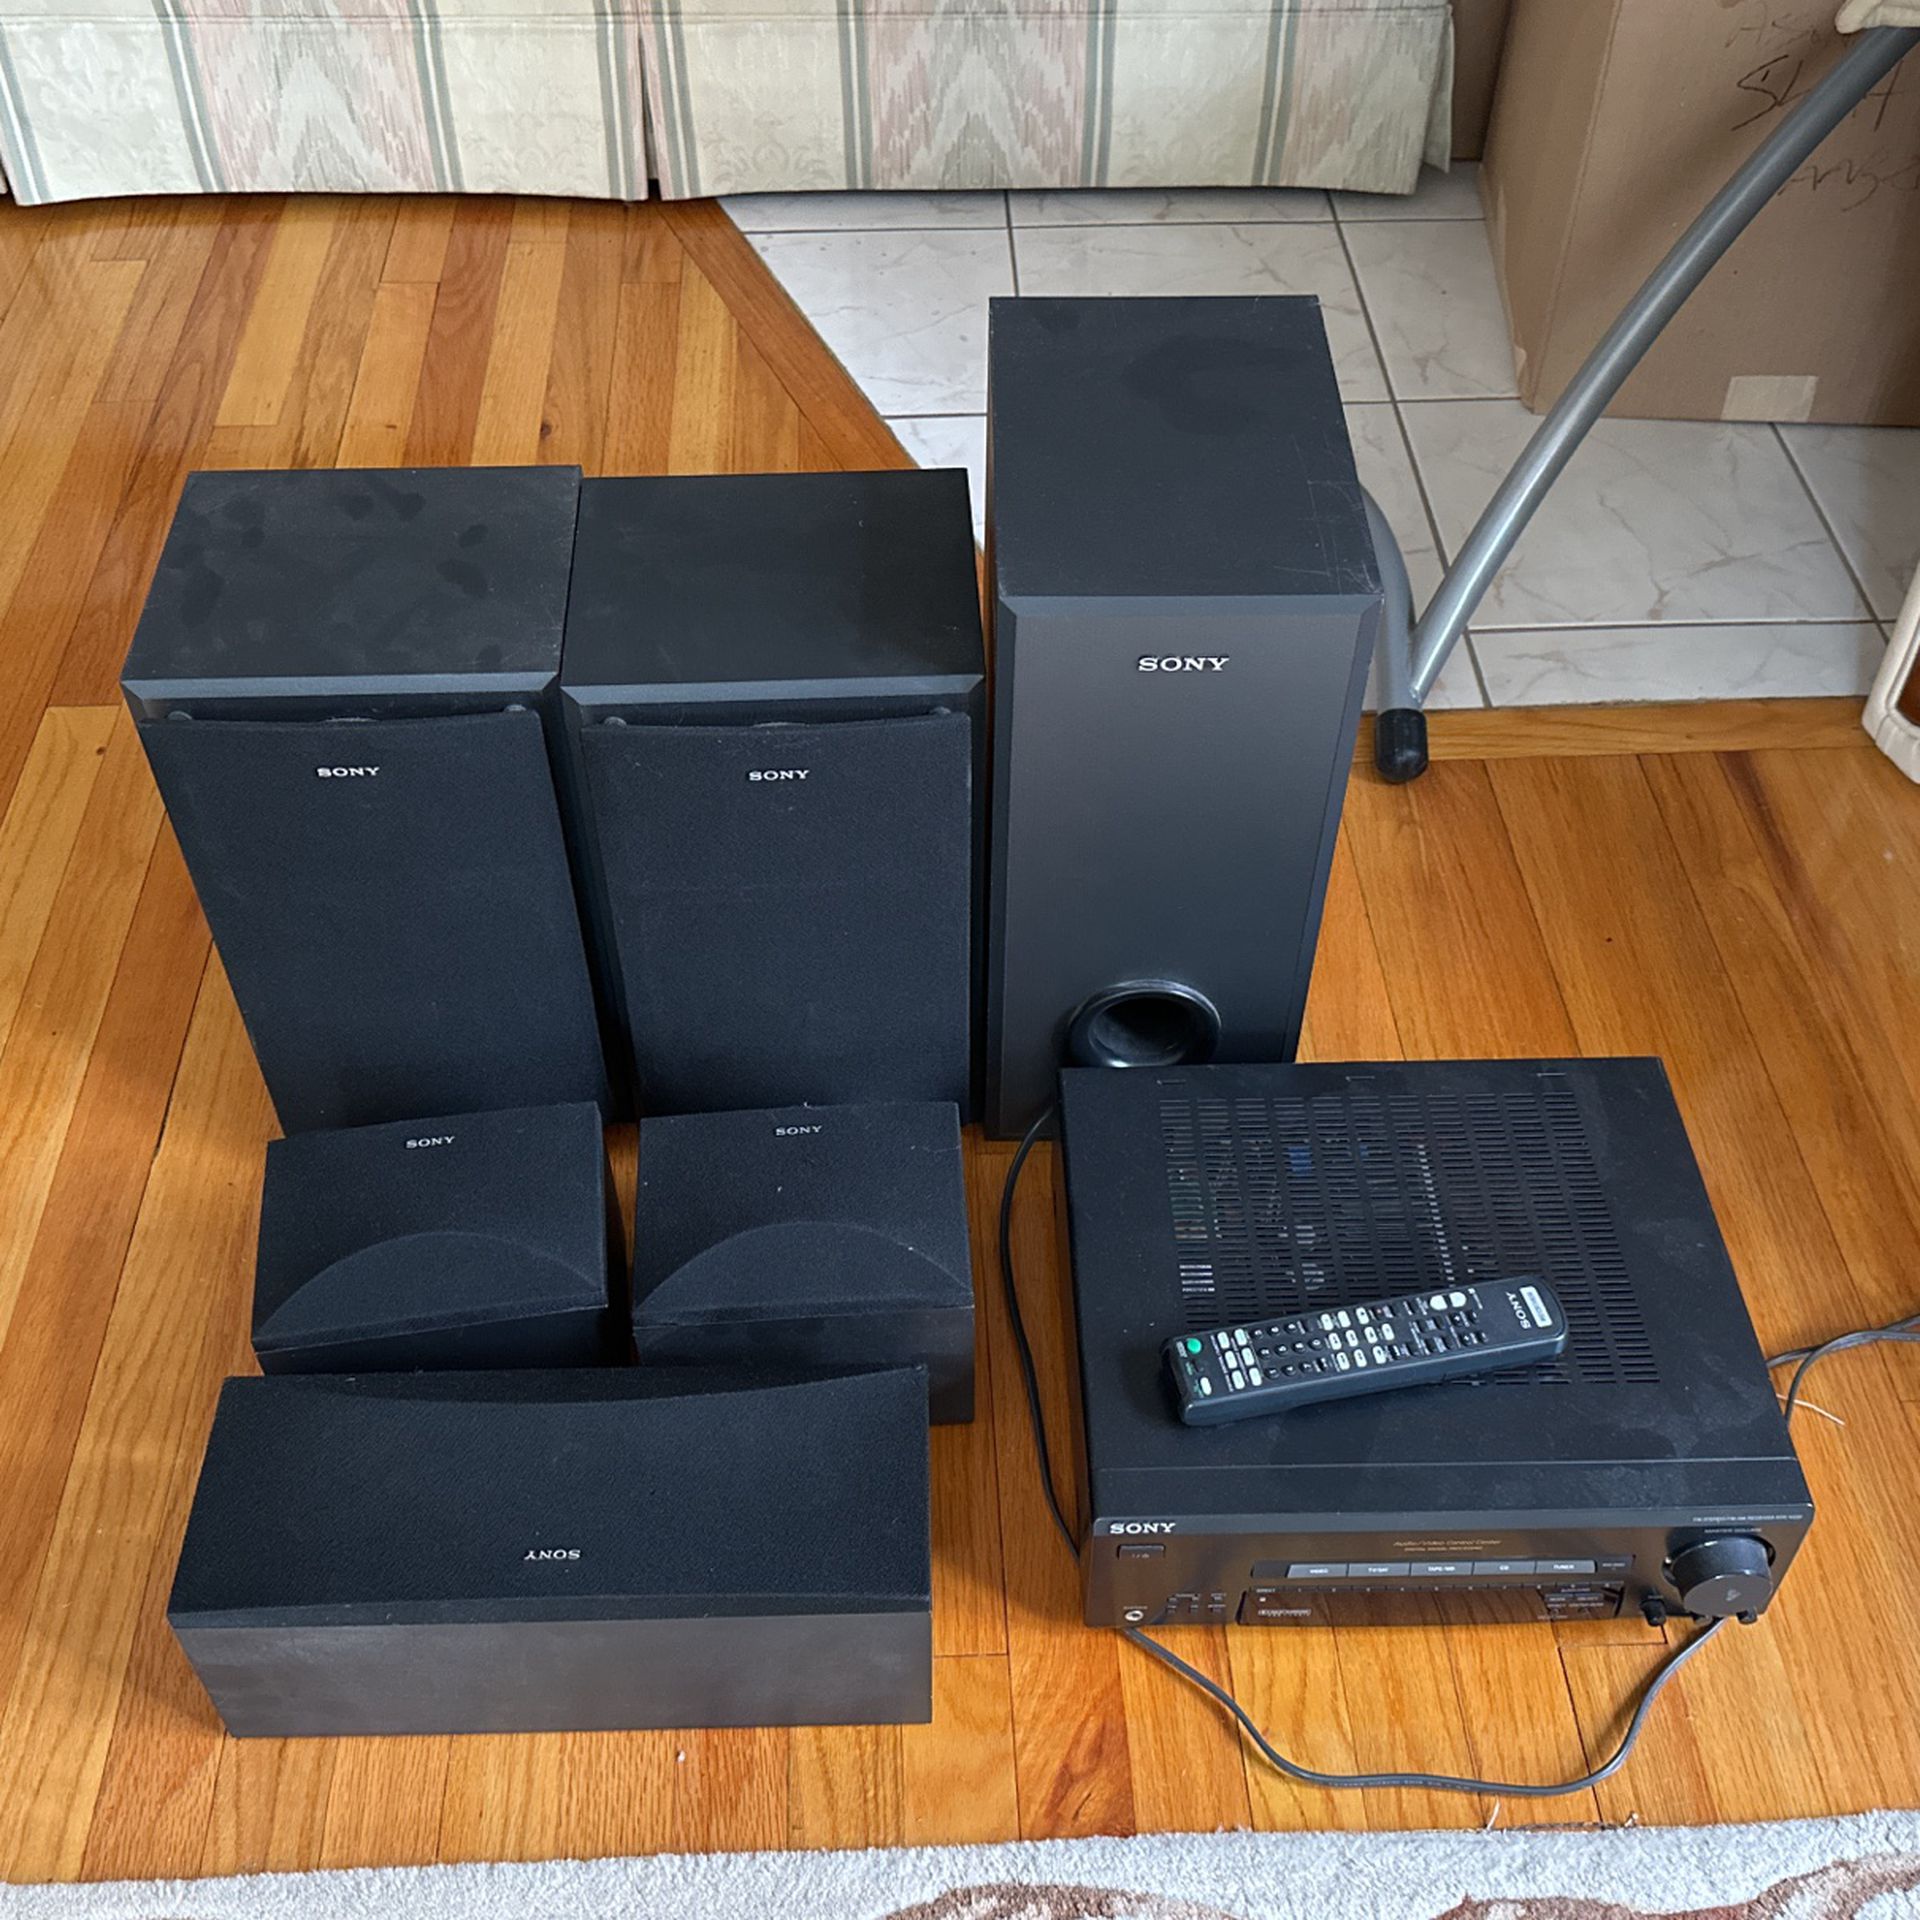 Sony Surround Sound System Includes 6 Soeakers